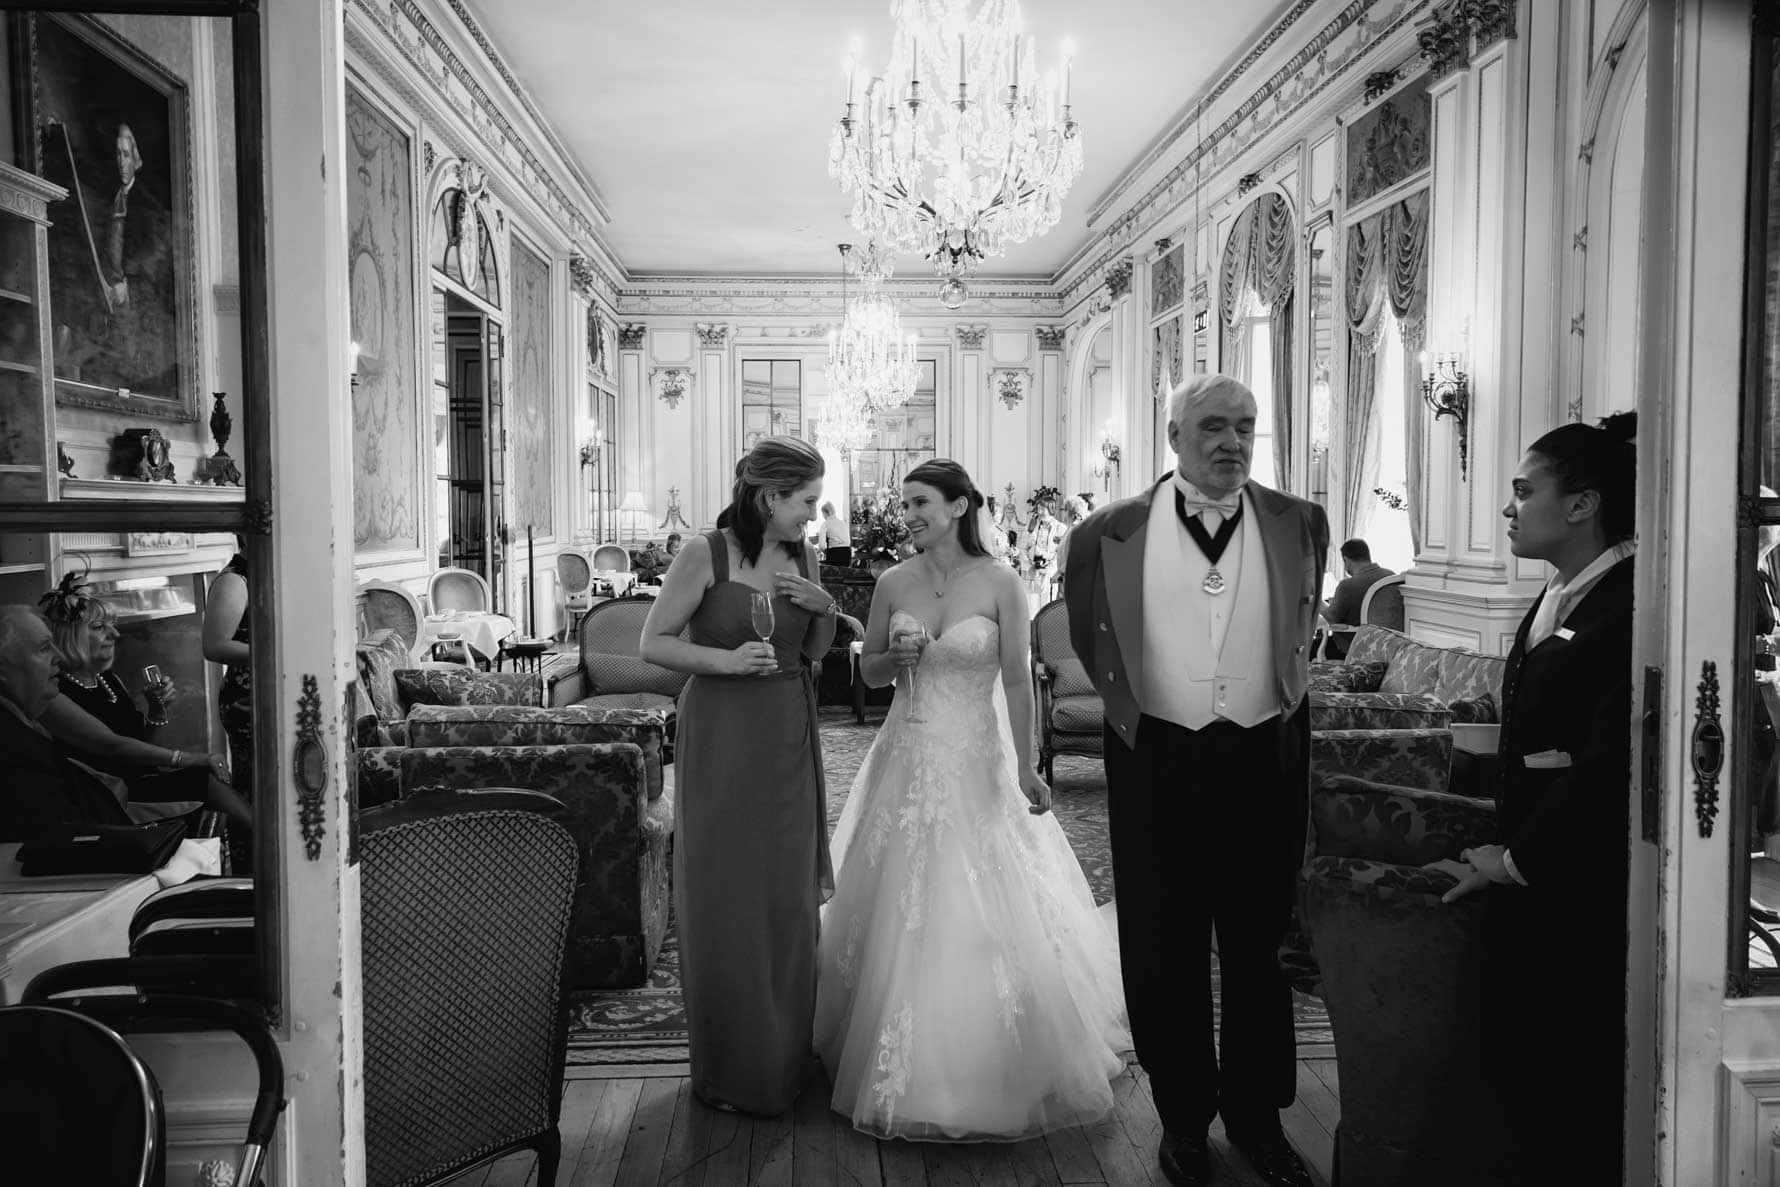 Bride and her bridesmaid at Luton Hoo wedding in Bedfordshire